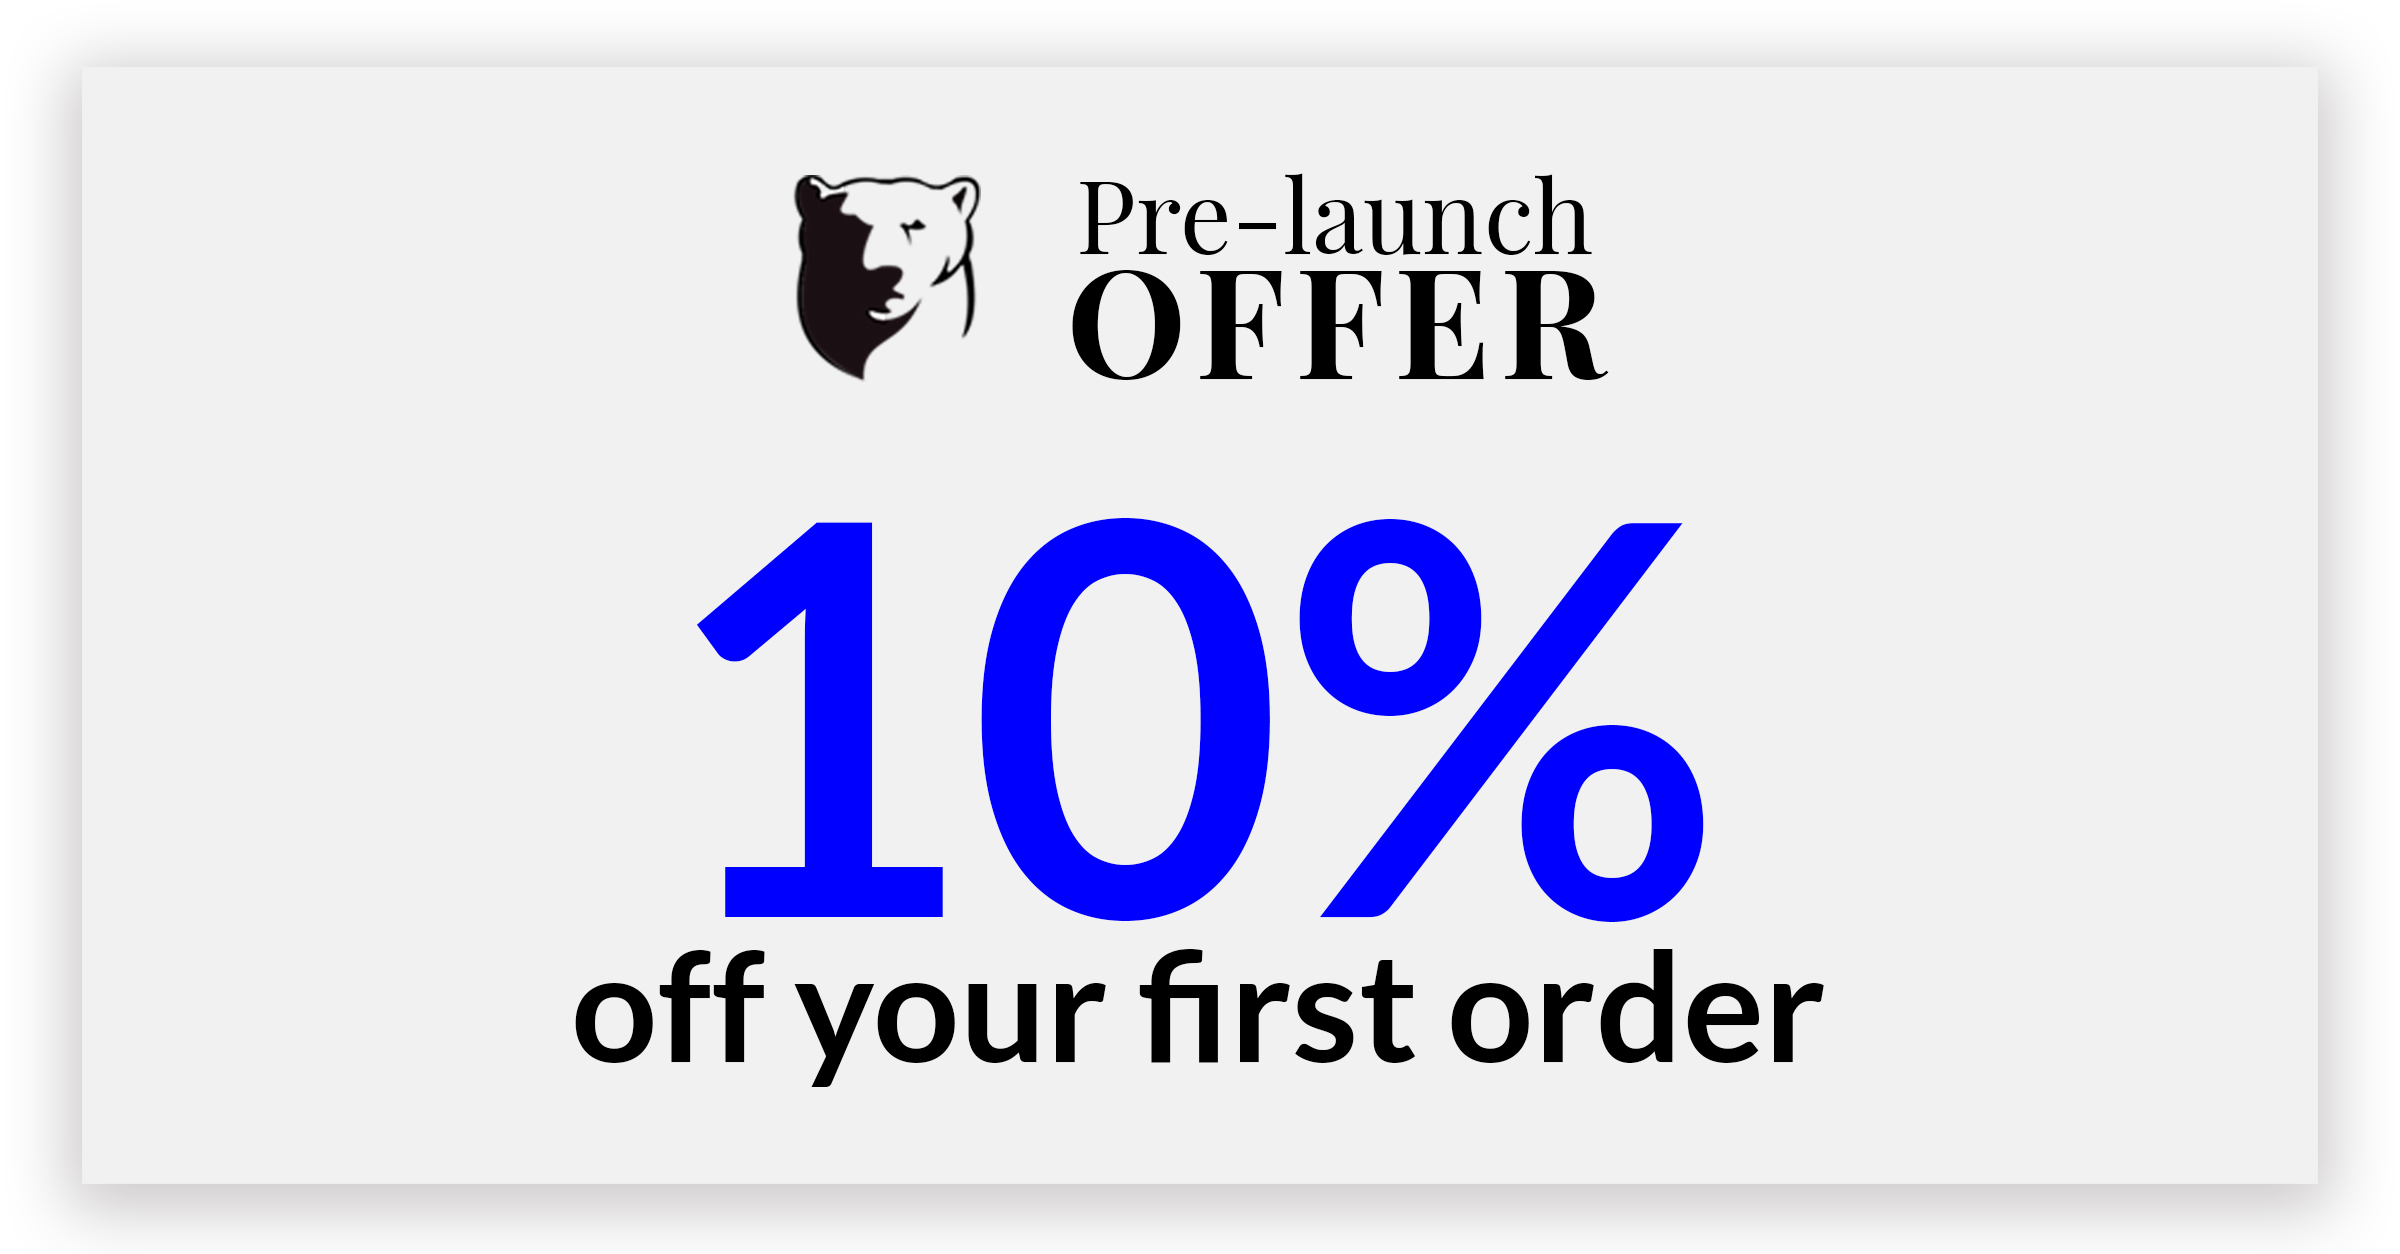 Special Offer: Sign up for our newsletter and get 10% off your first order!